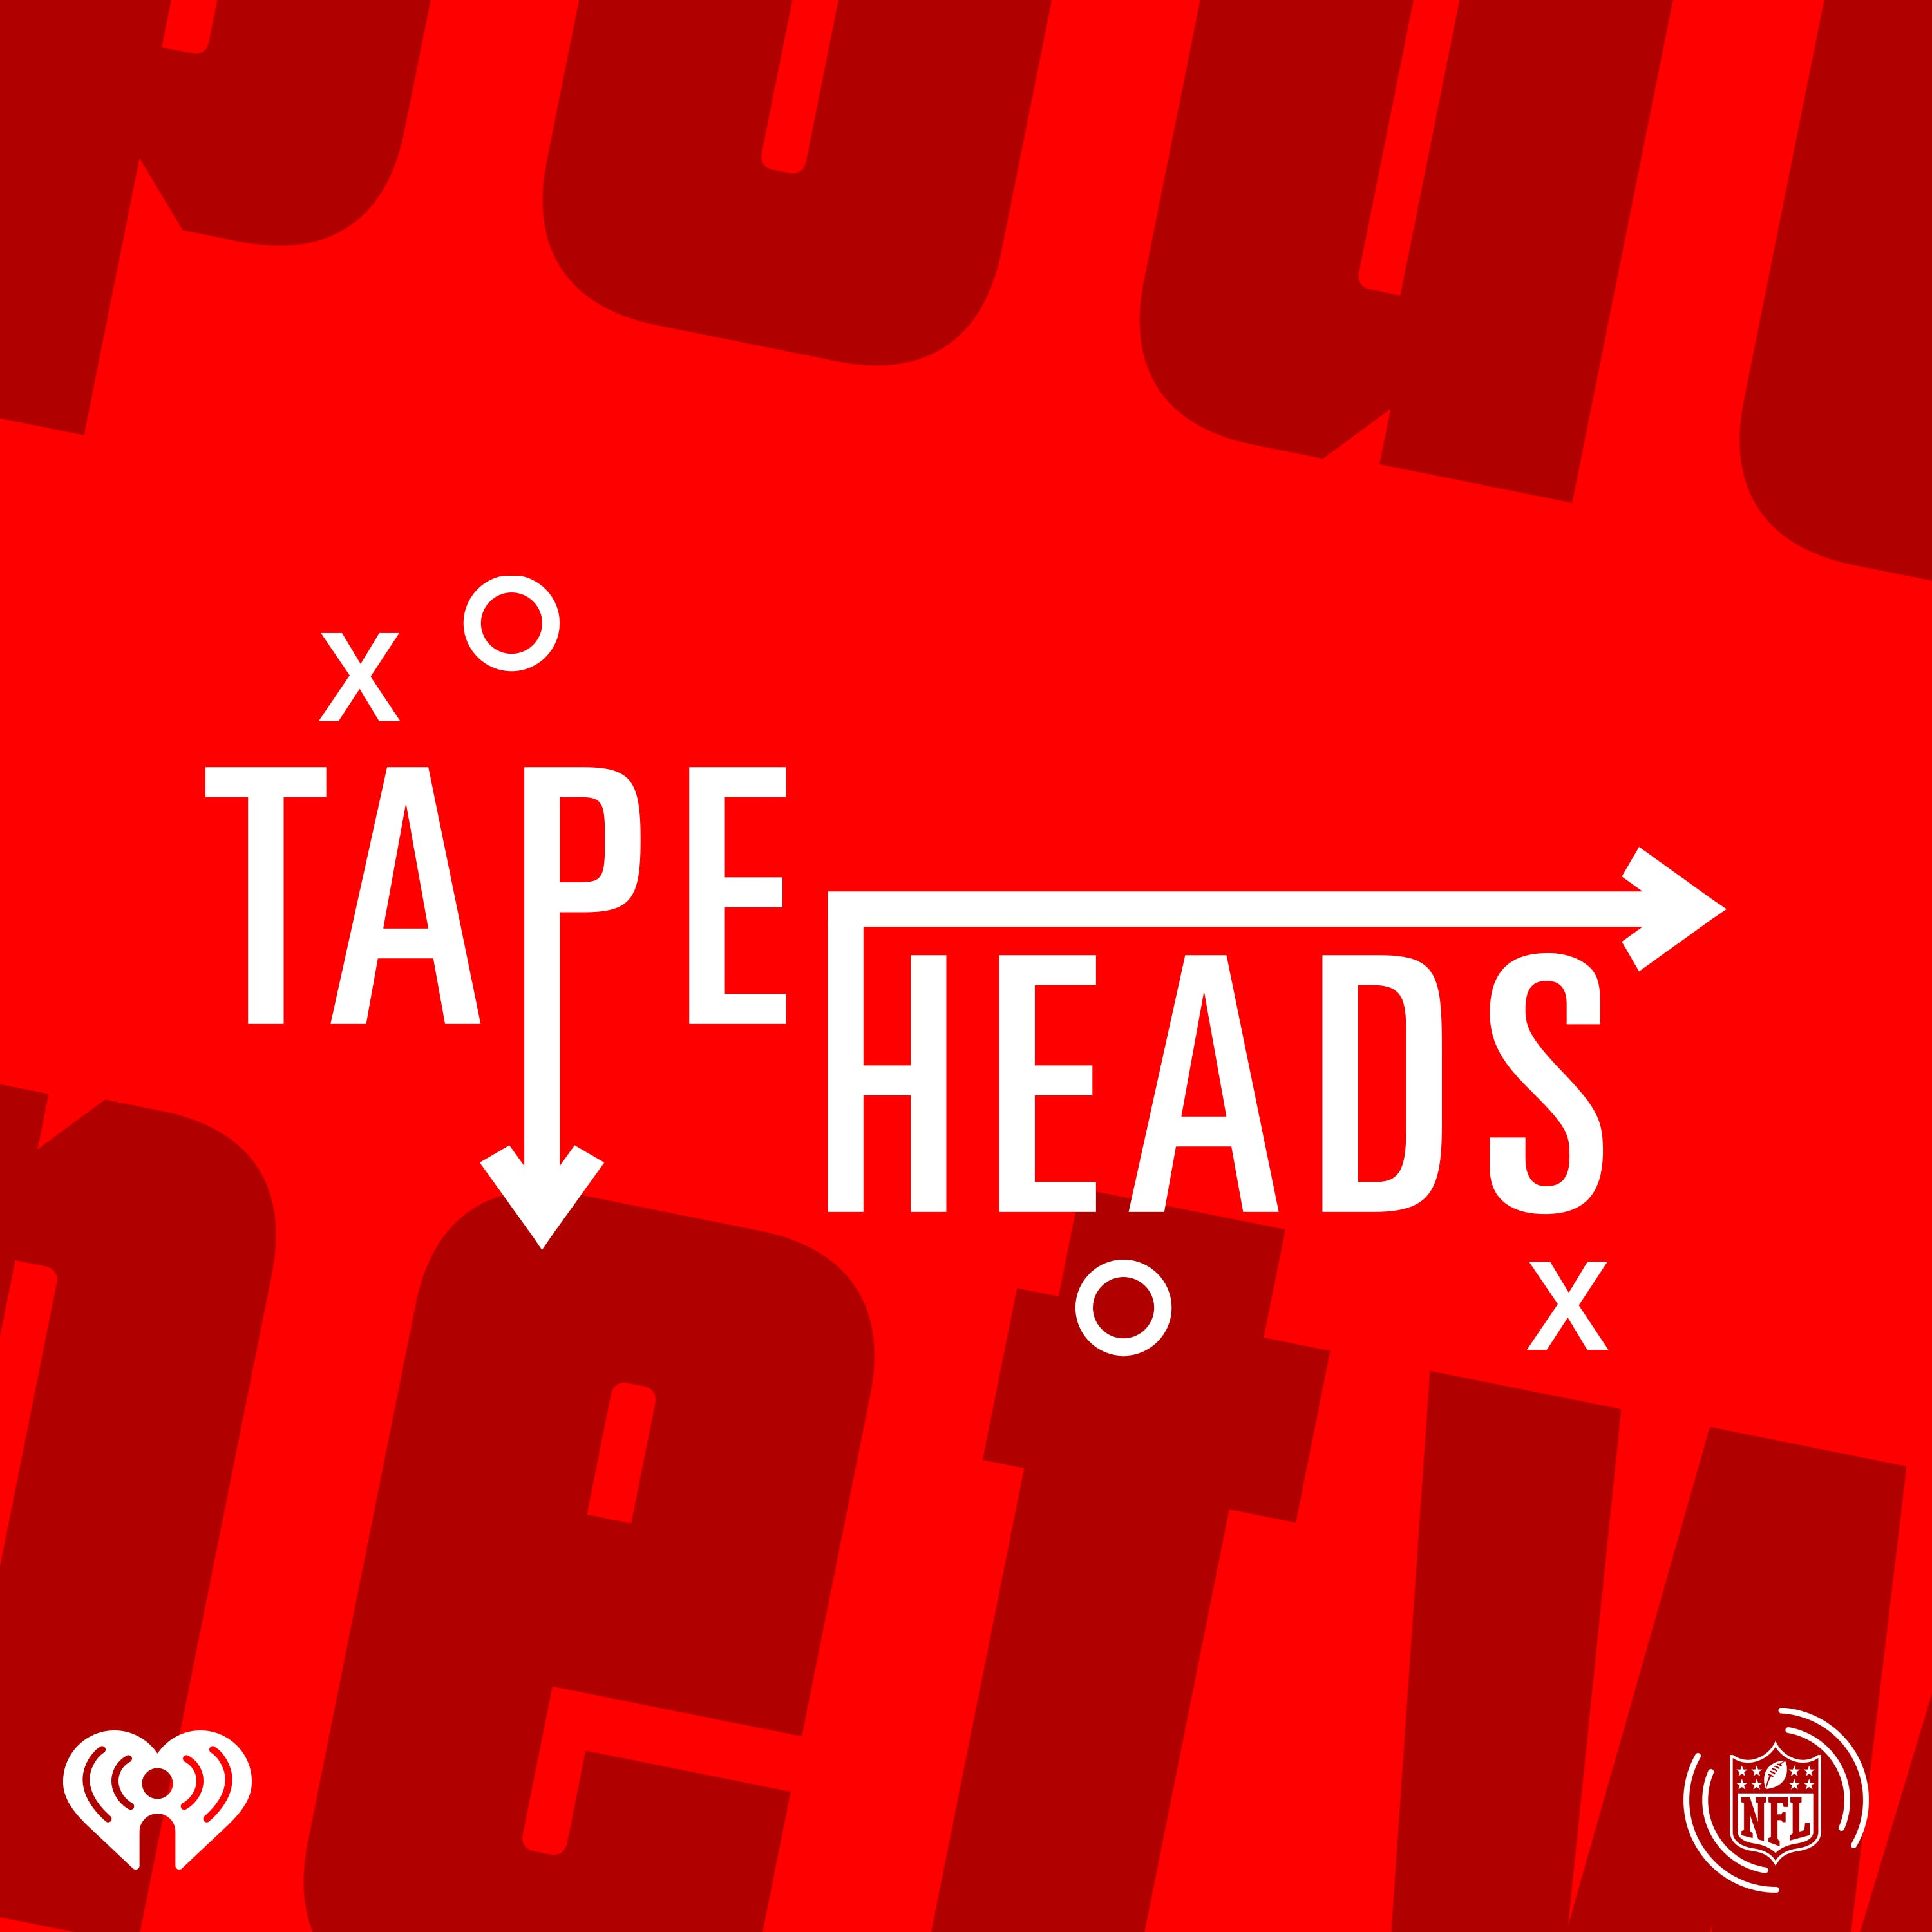 Introducing: Tape Heads